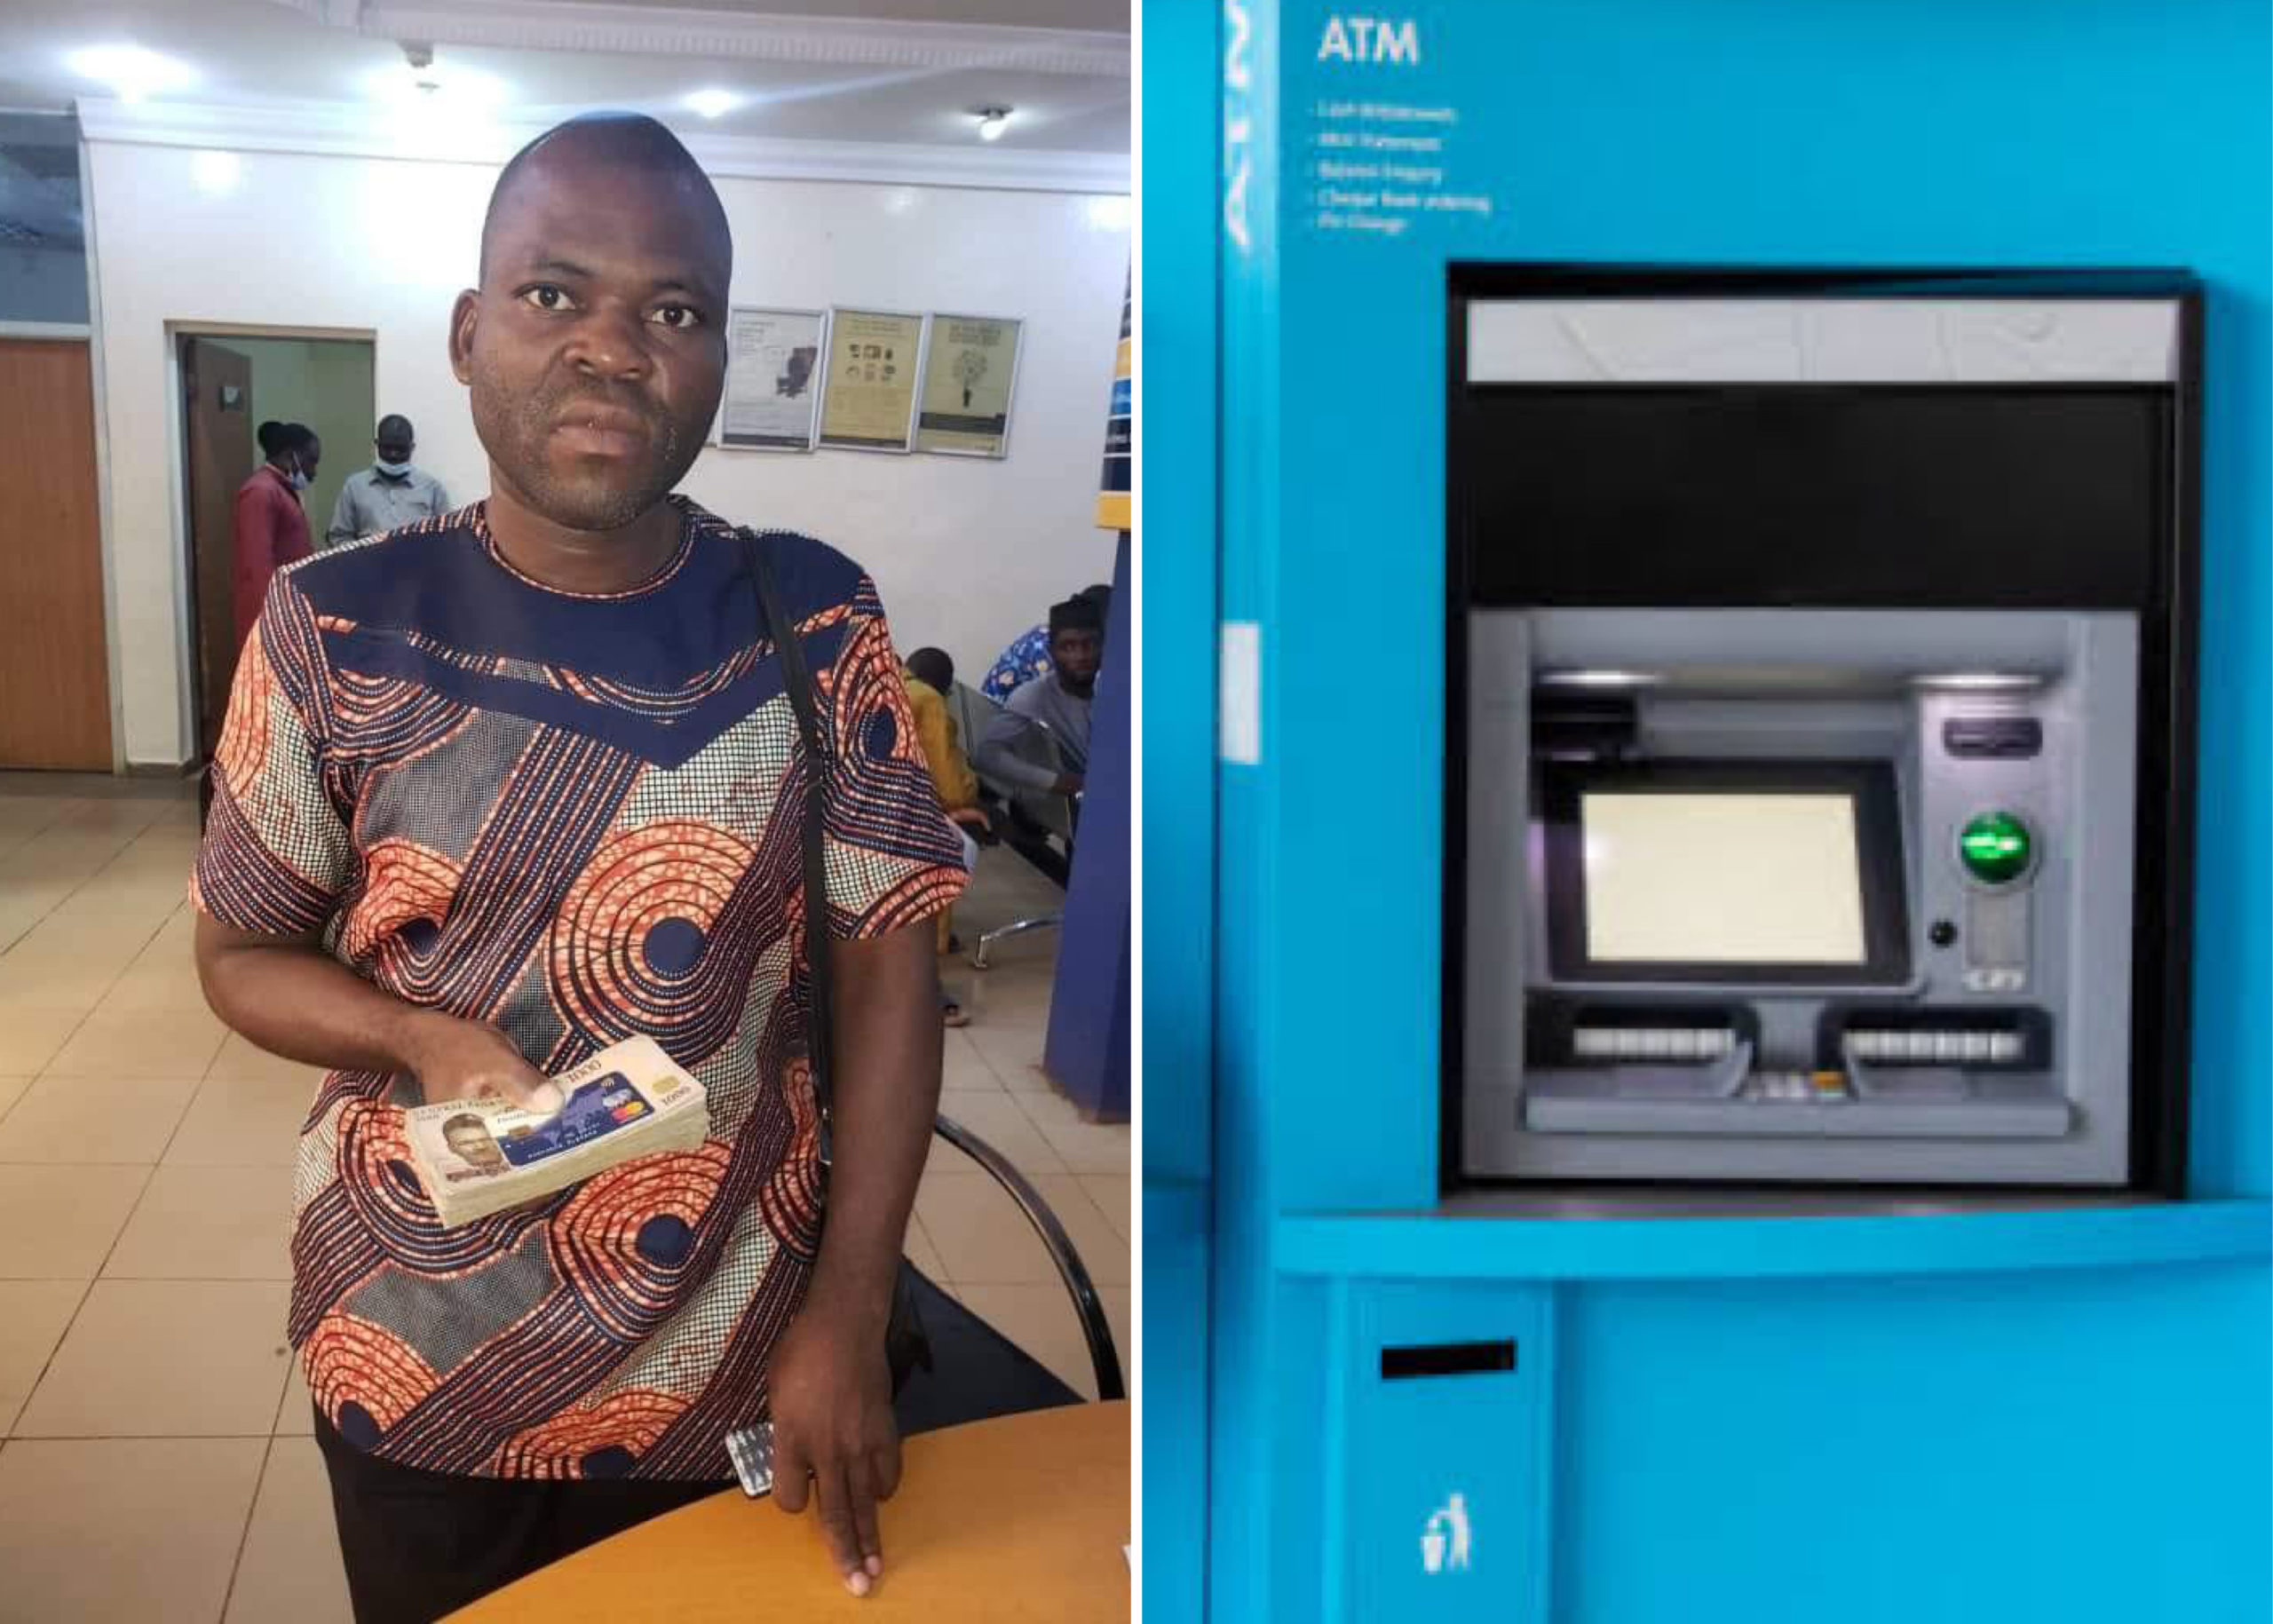 Man Returns Cash, Debit Card Found At ATM Gallery To Bank In Sokoto